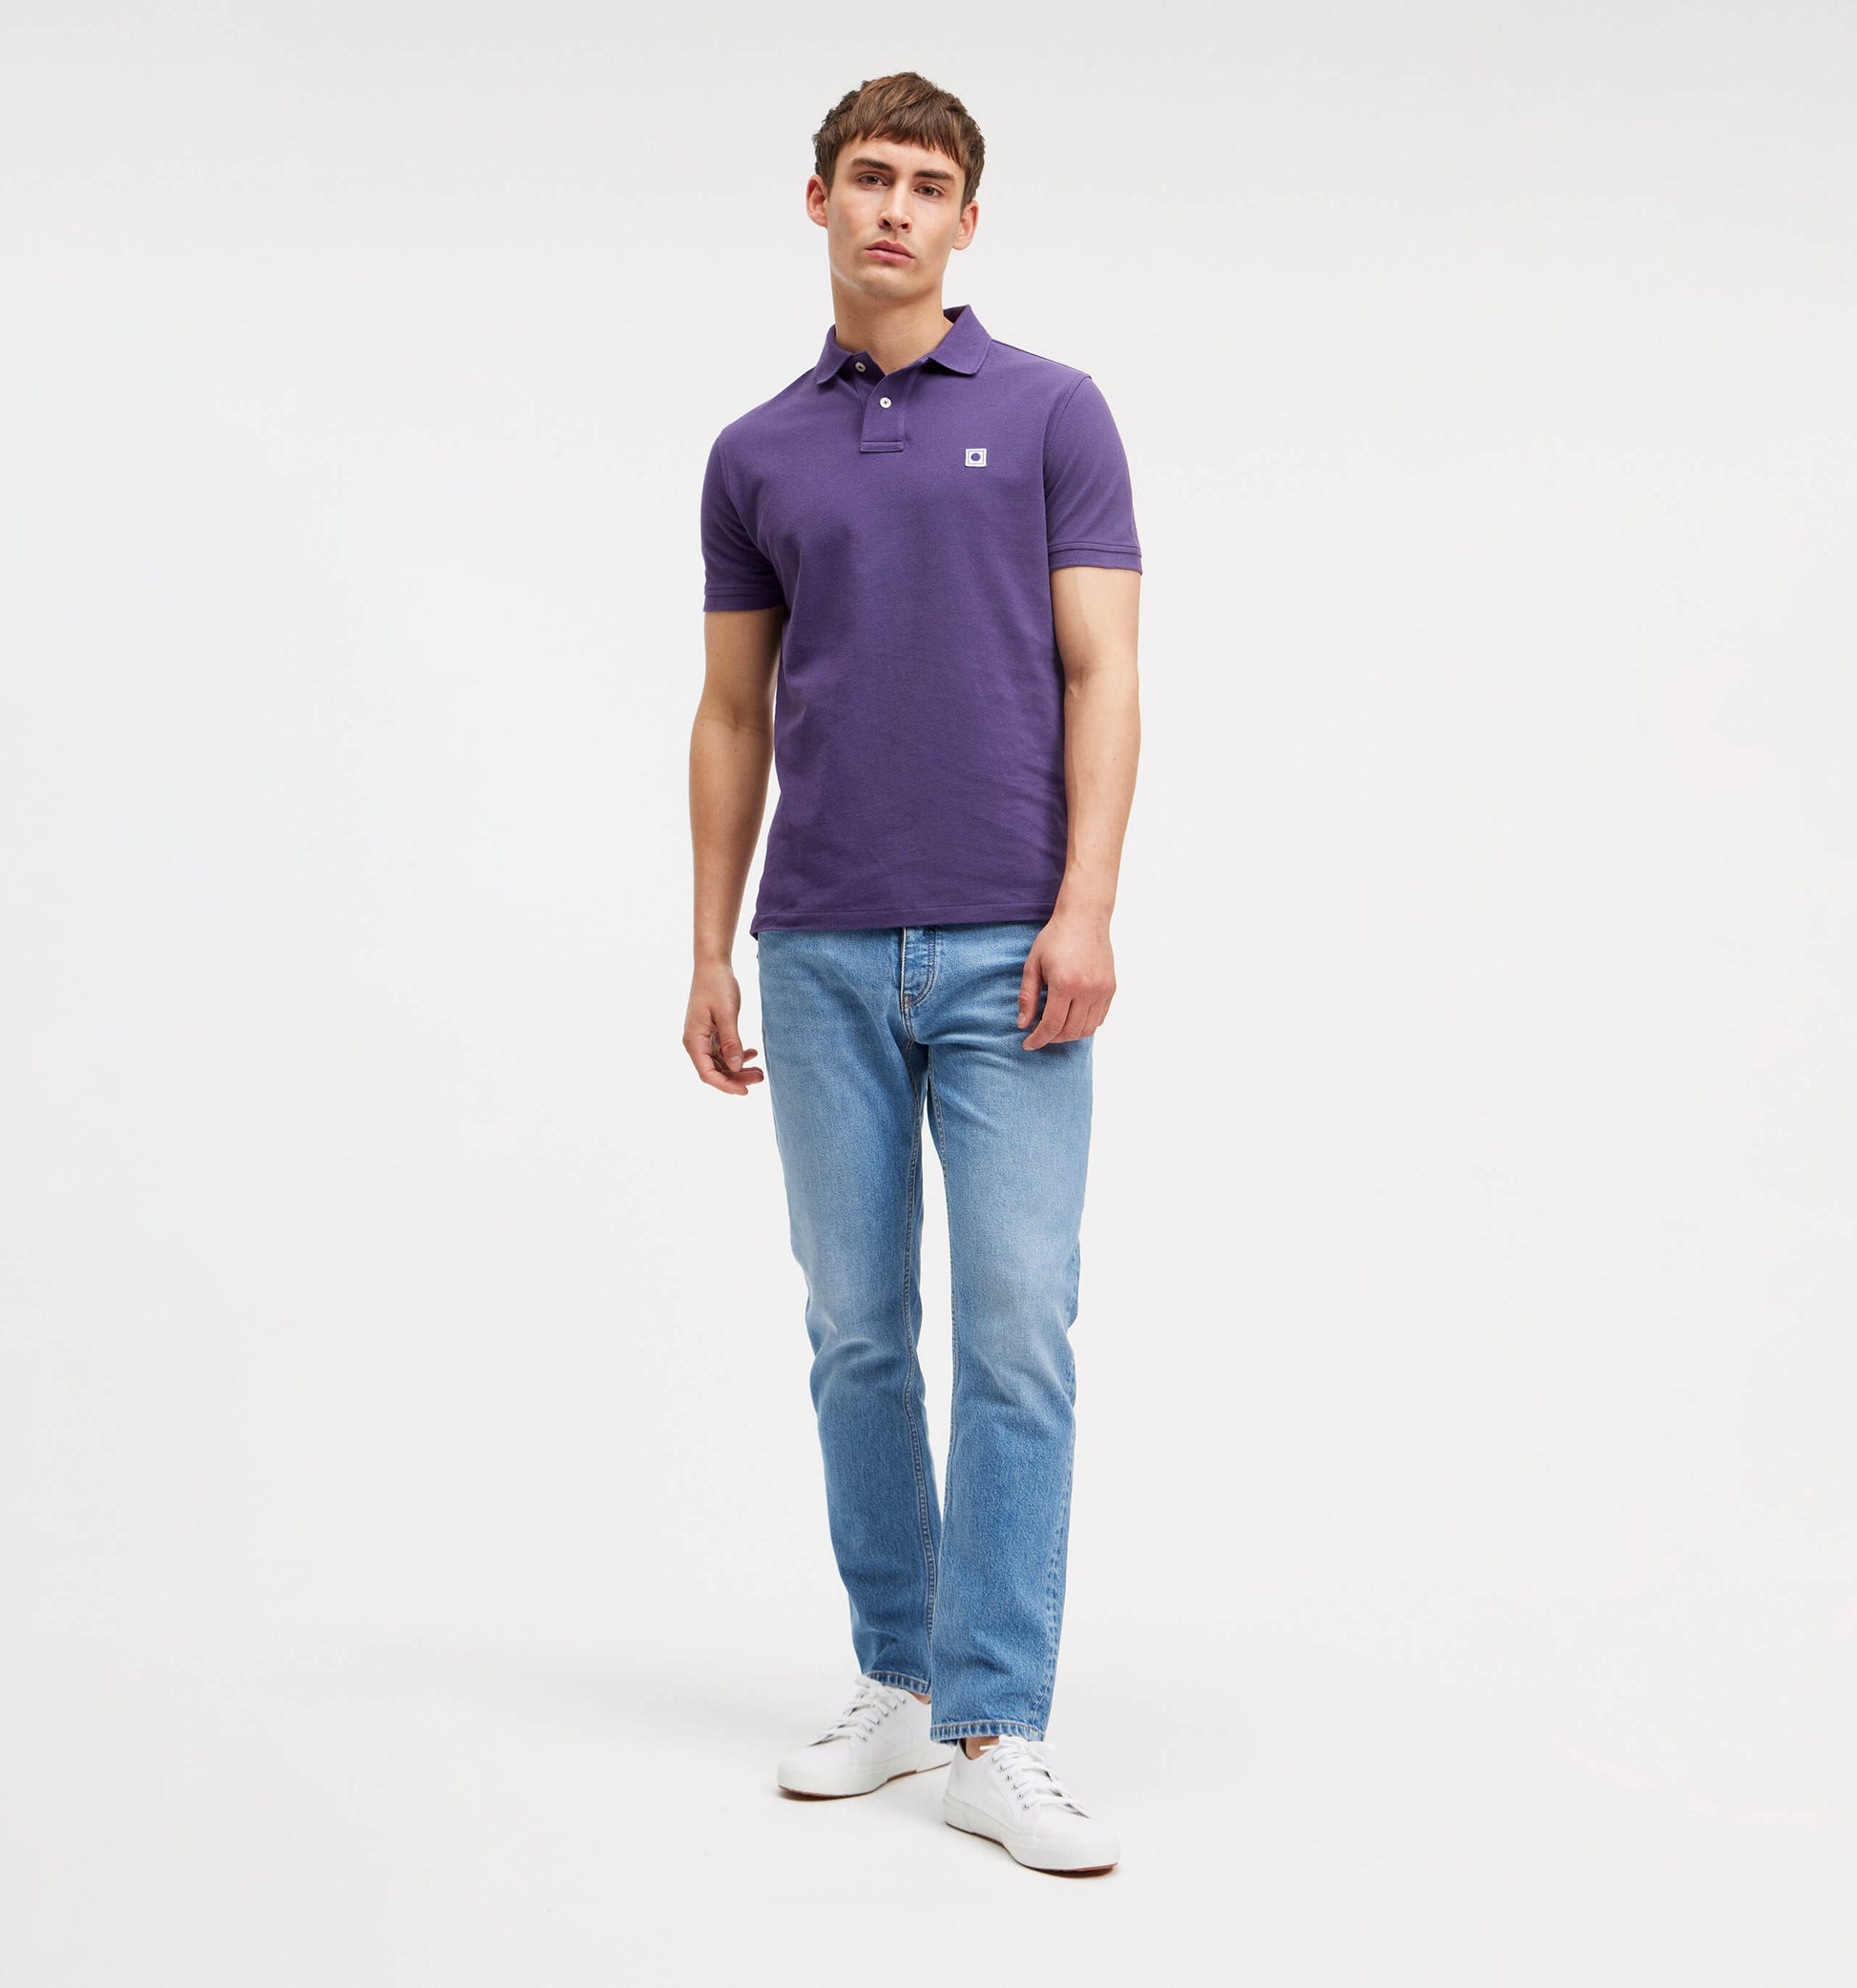 The Rene - Pique Polo In Dark Purple From King Essentials